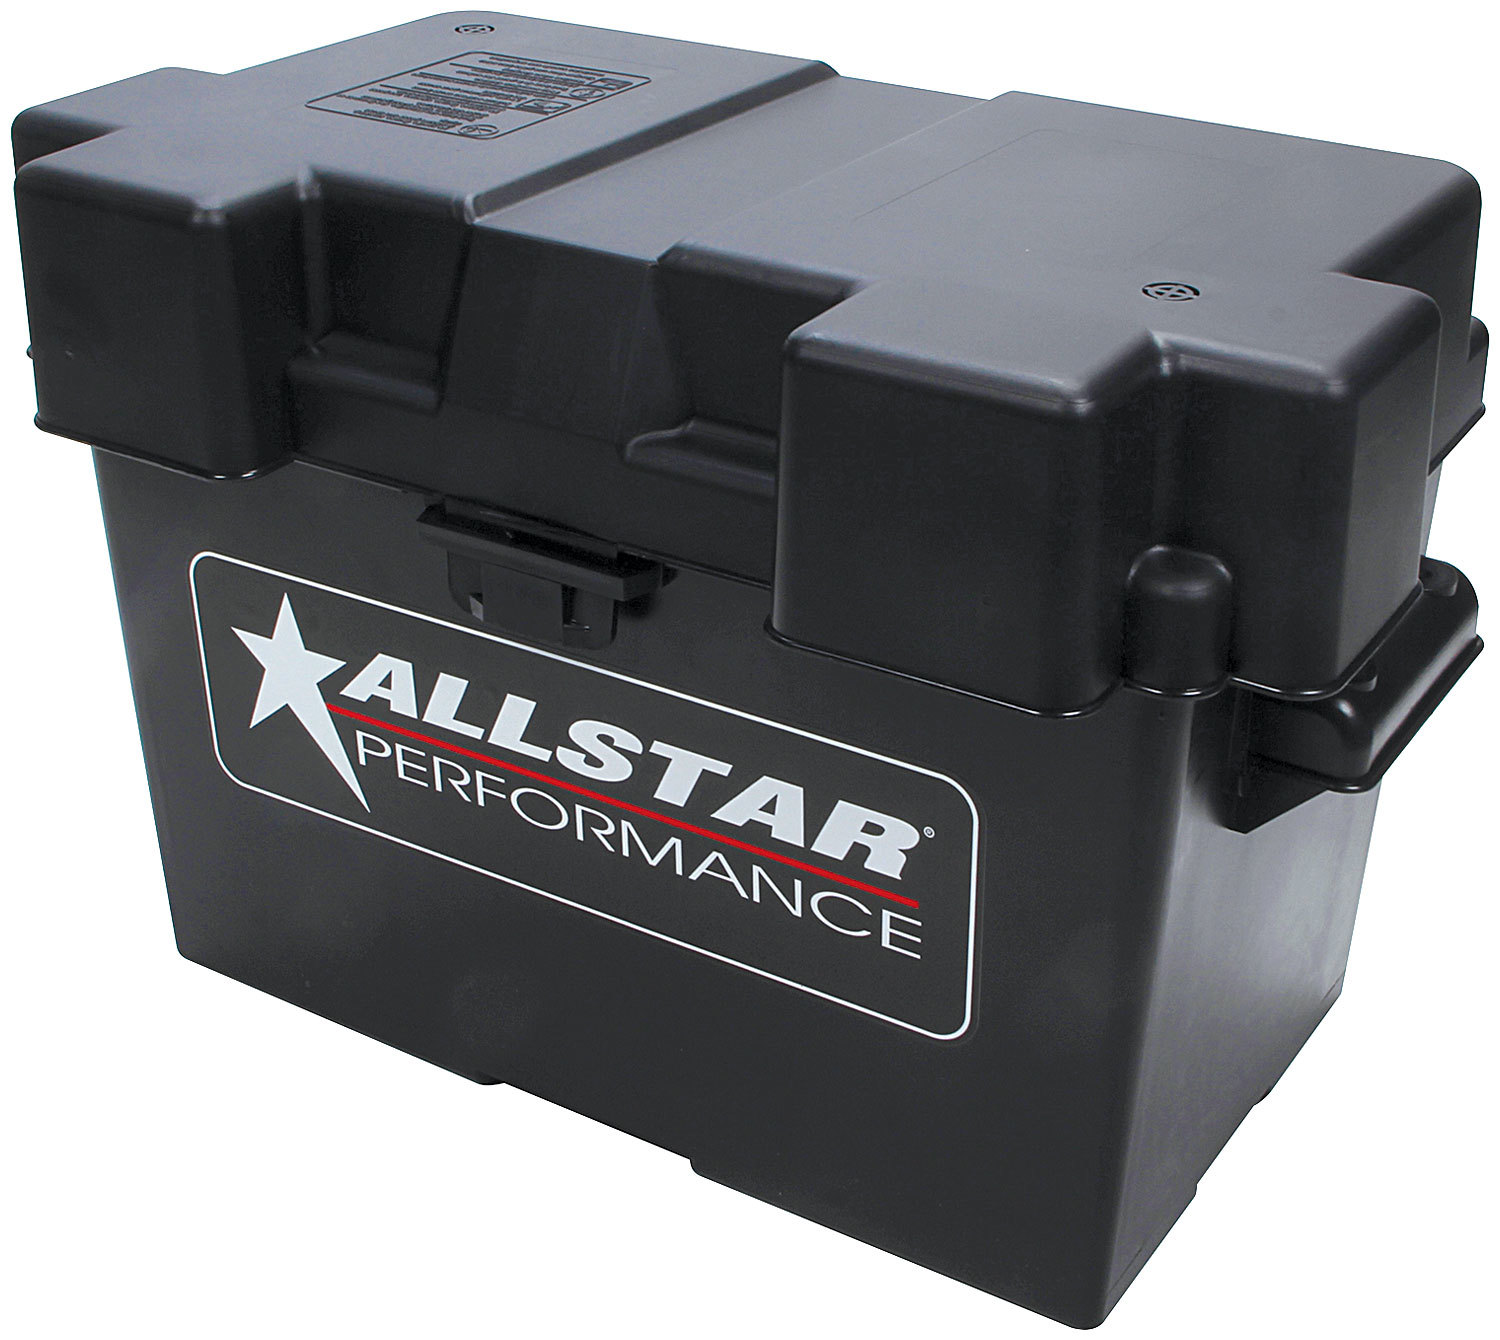 Allstar Performance 76099 Battery Box, 16-1/8 x 9-5/8 x 10-7/8 in, Hardware Included, Plastic, Black, Each